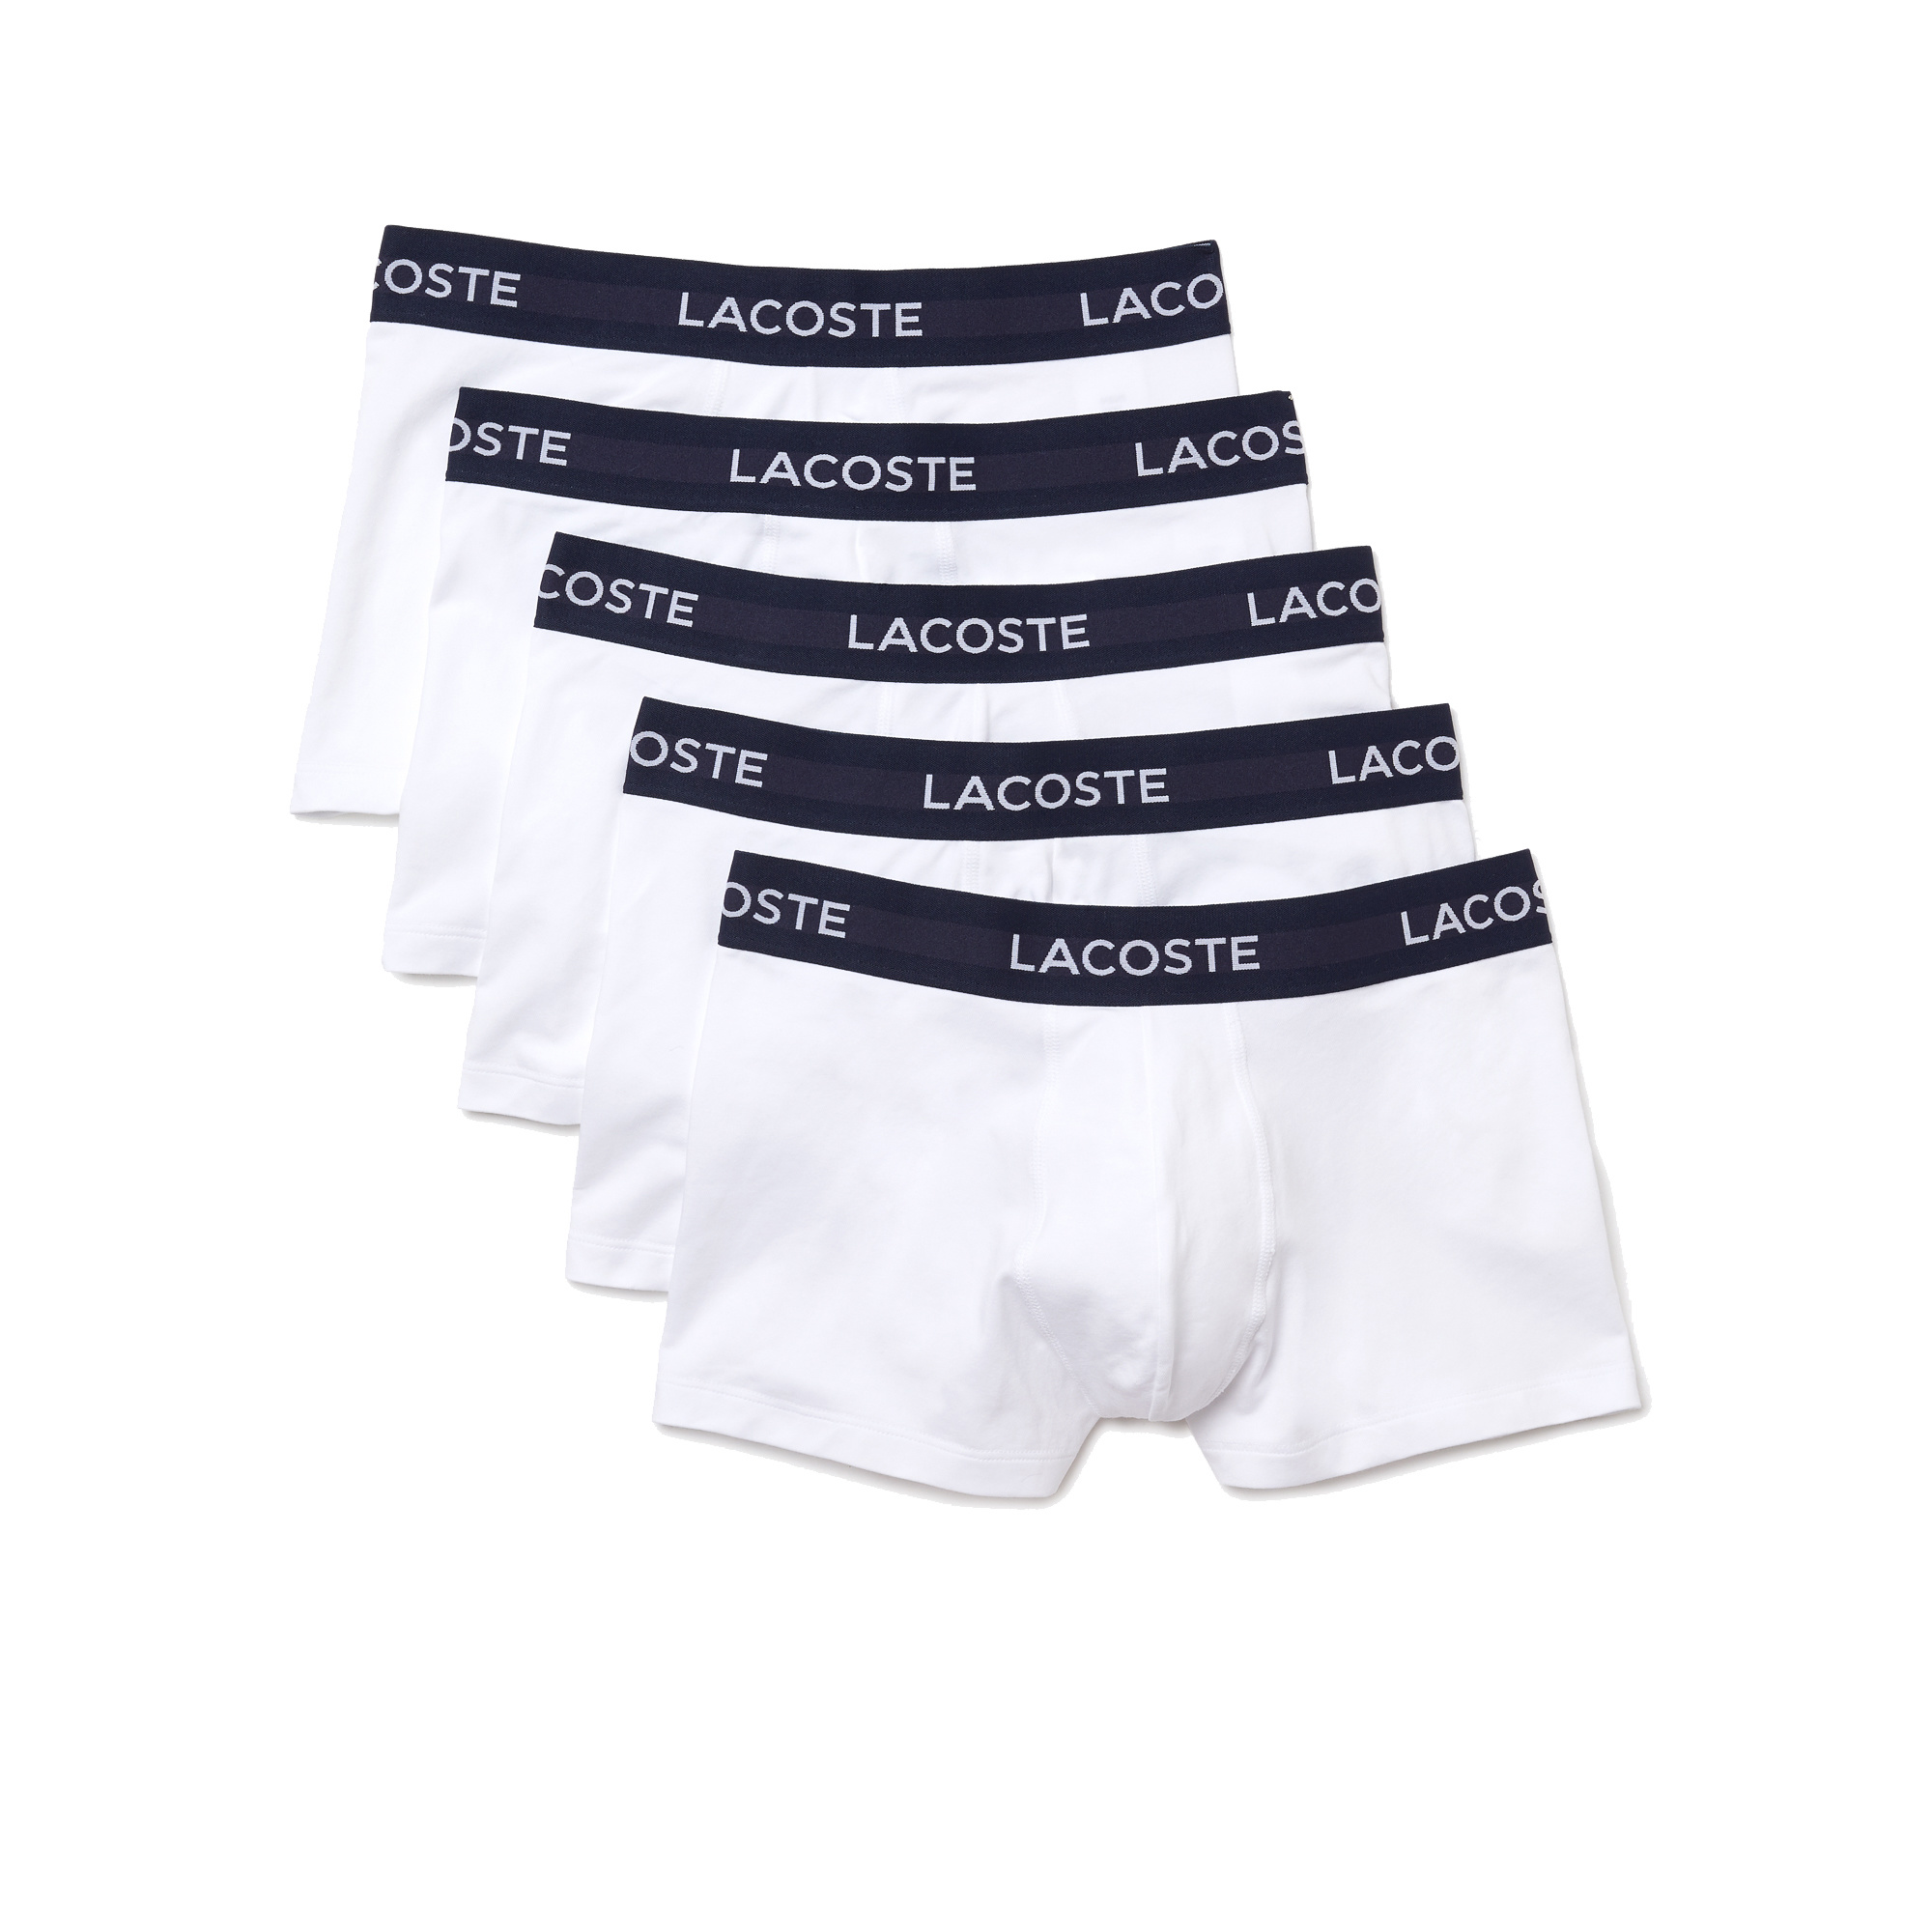 Lacoste Lacoste Casual Witte Boxershorts Heren Multipack Wit 5 Pack